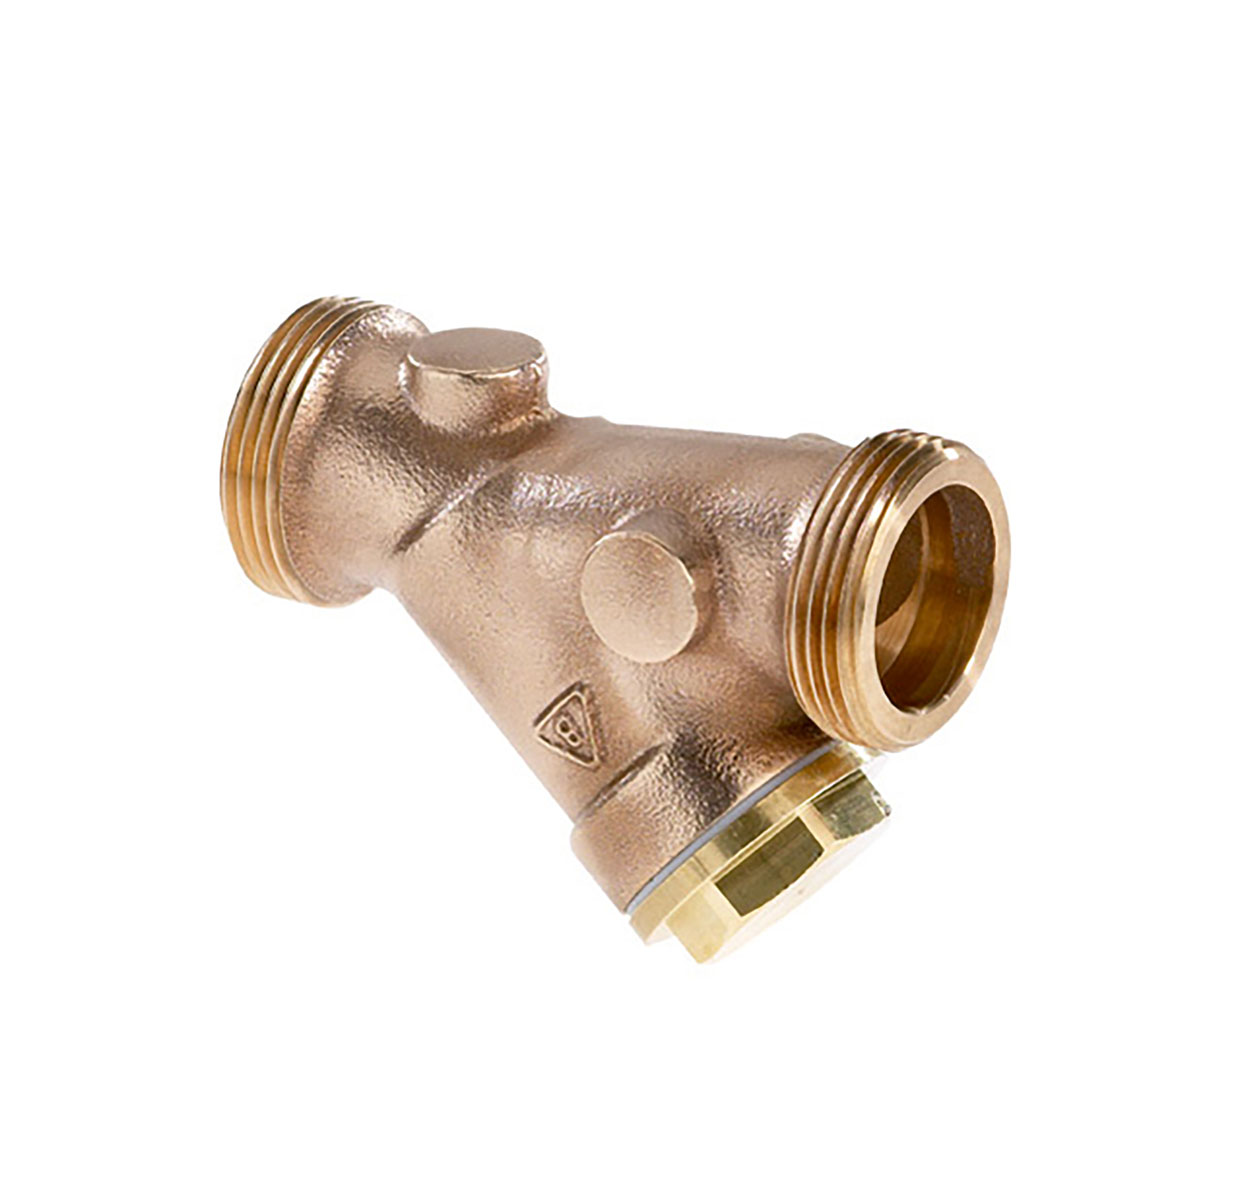 2452320 - Red-brass Strainer Strainer with PTFE-sealing (Teflon)